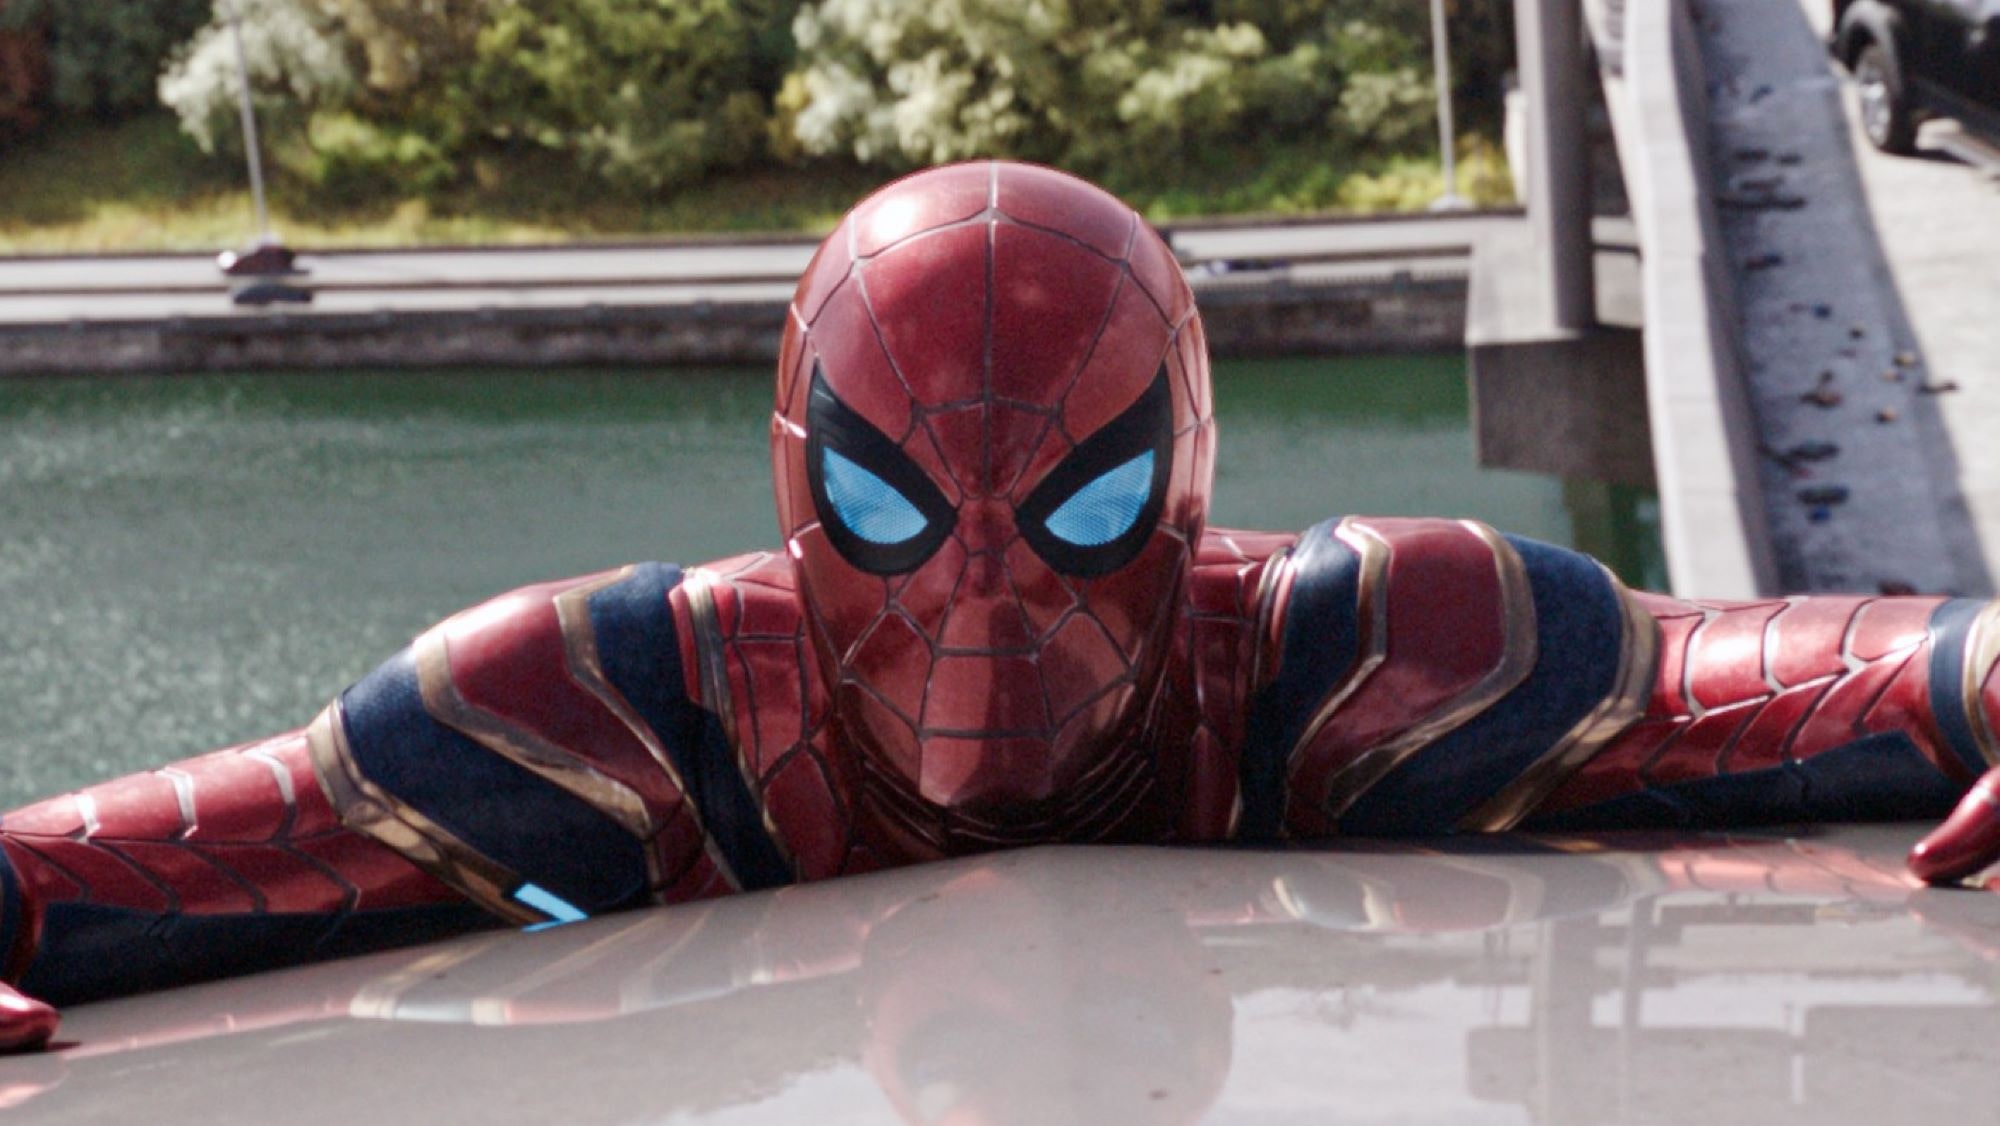 Watch 'Spider-Man: No Way Home' online streaming free at home – Film Daily